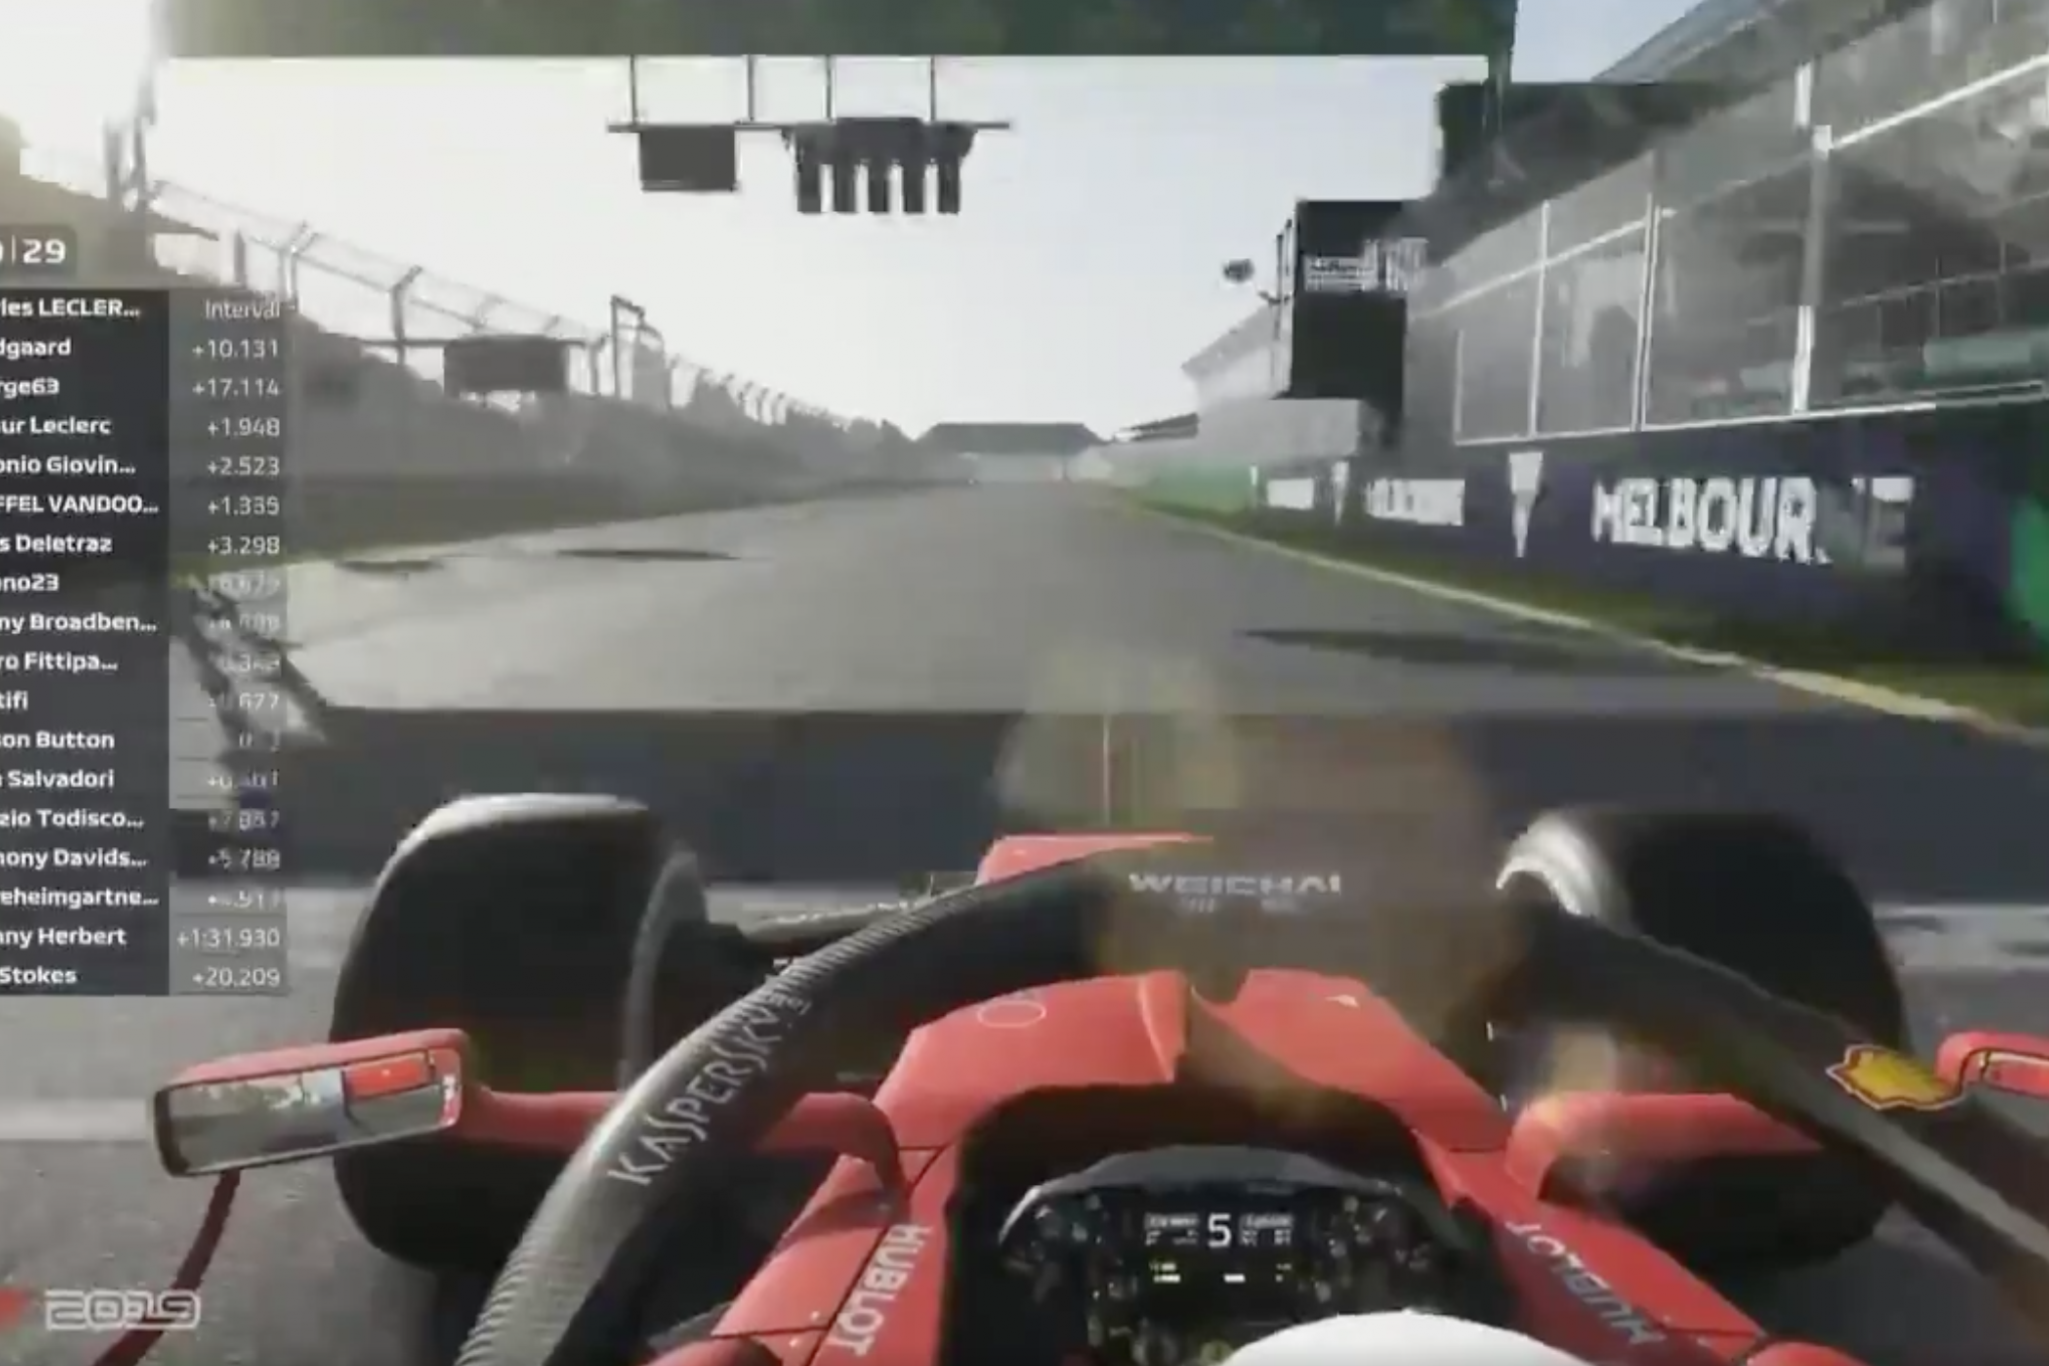 https://static.independent.co.uk/s3fs-public/thumbnails/image/2020/04/05/21/charles-leclerc.png